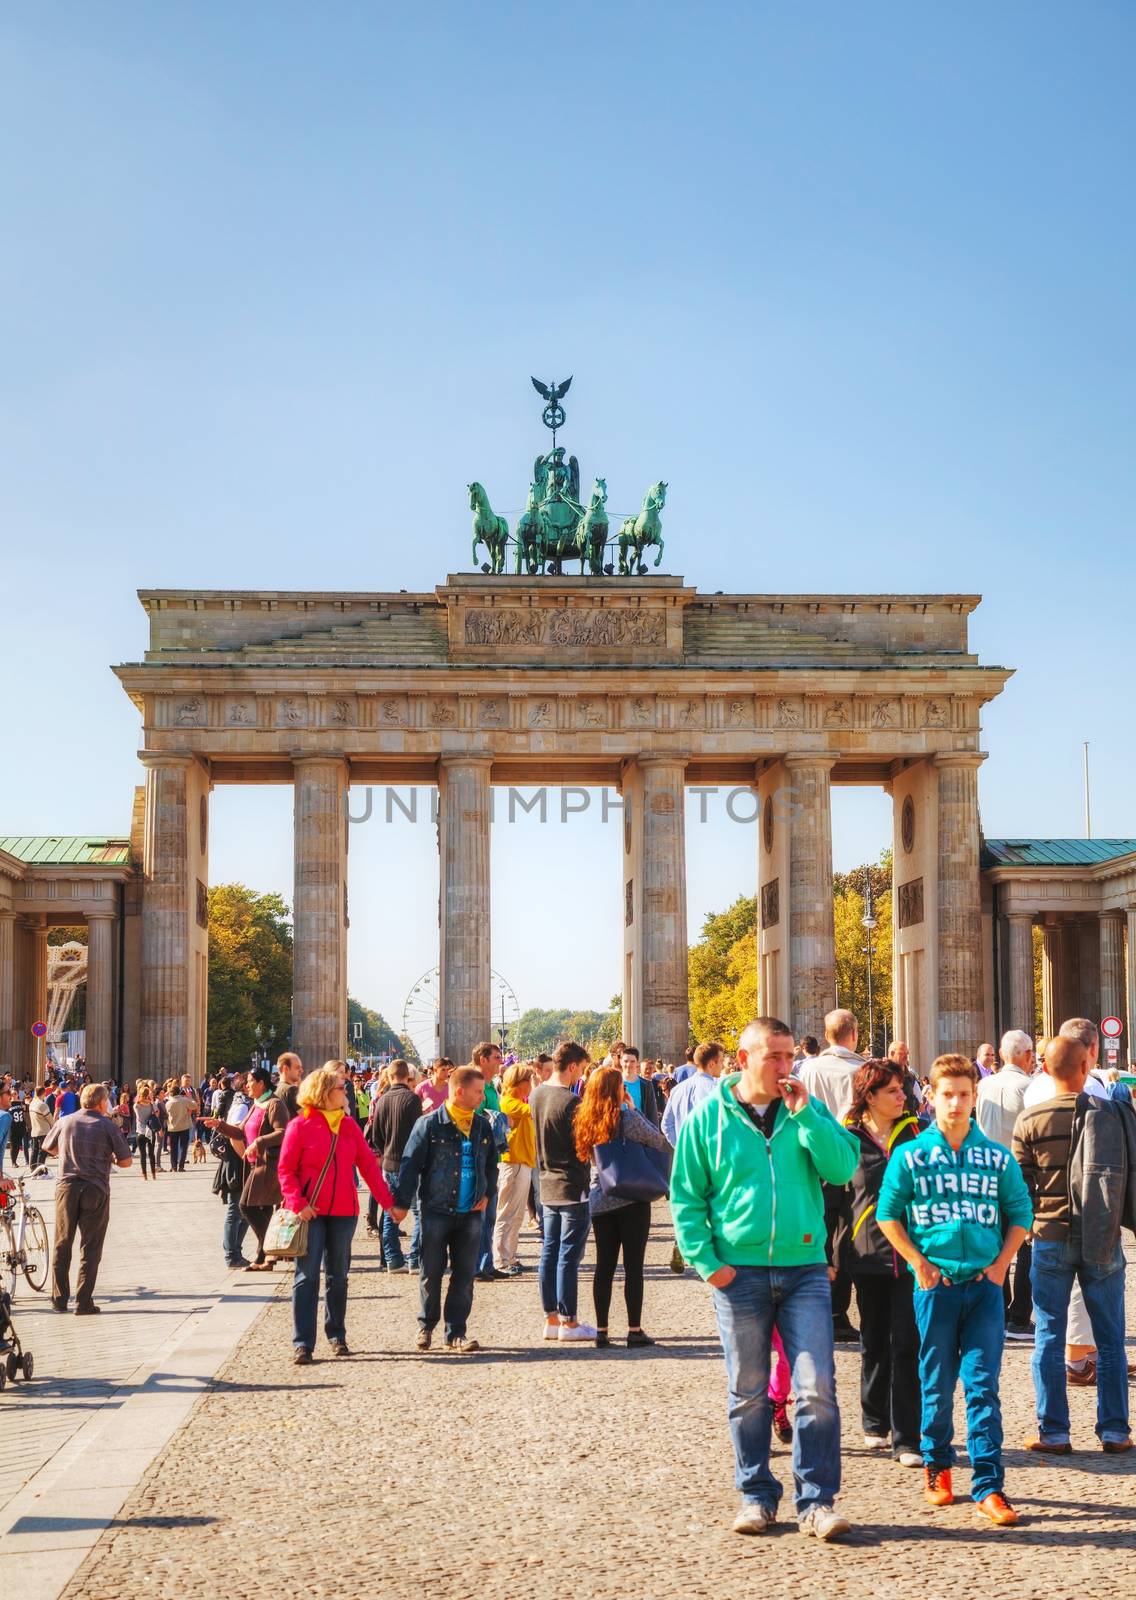 BERLIN - OCTOBER 4: Brandenburg gate (Brandenburger Tor) on October 4, 2014 in Berlin, Germany. It's an 18th-century neoclassical triumphal arch in Berlin, one of the best-known landmarks of Germany.